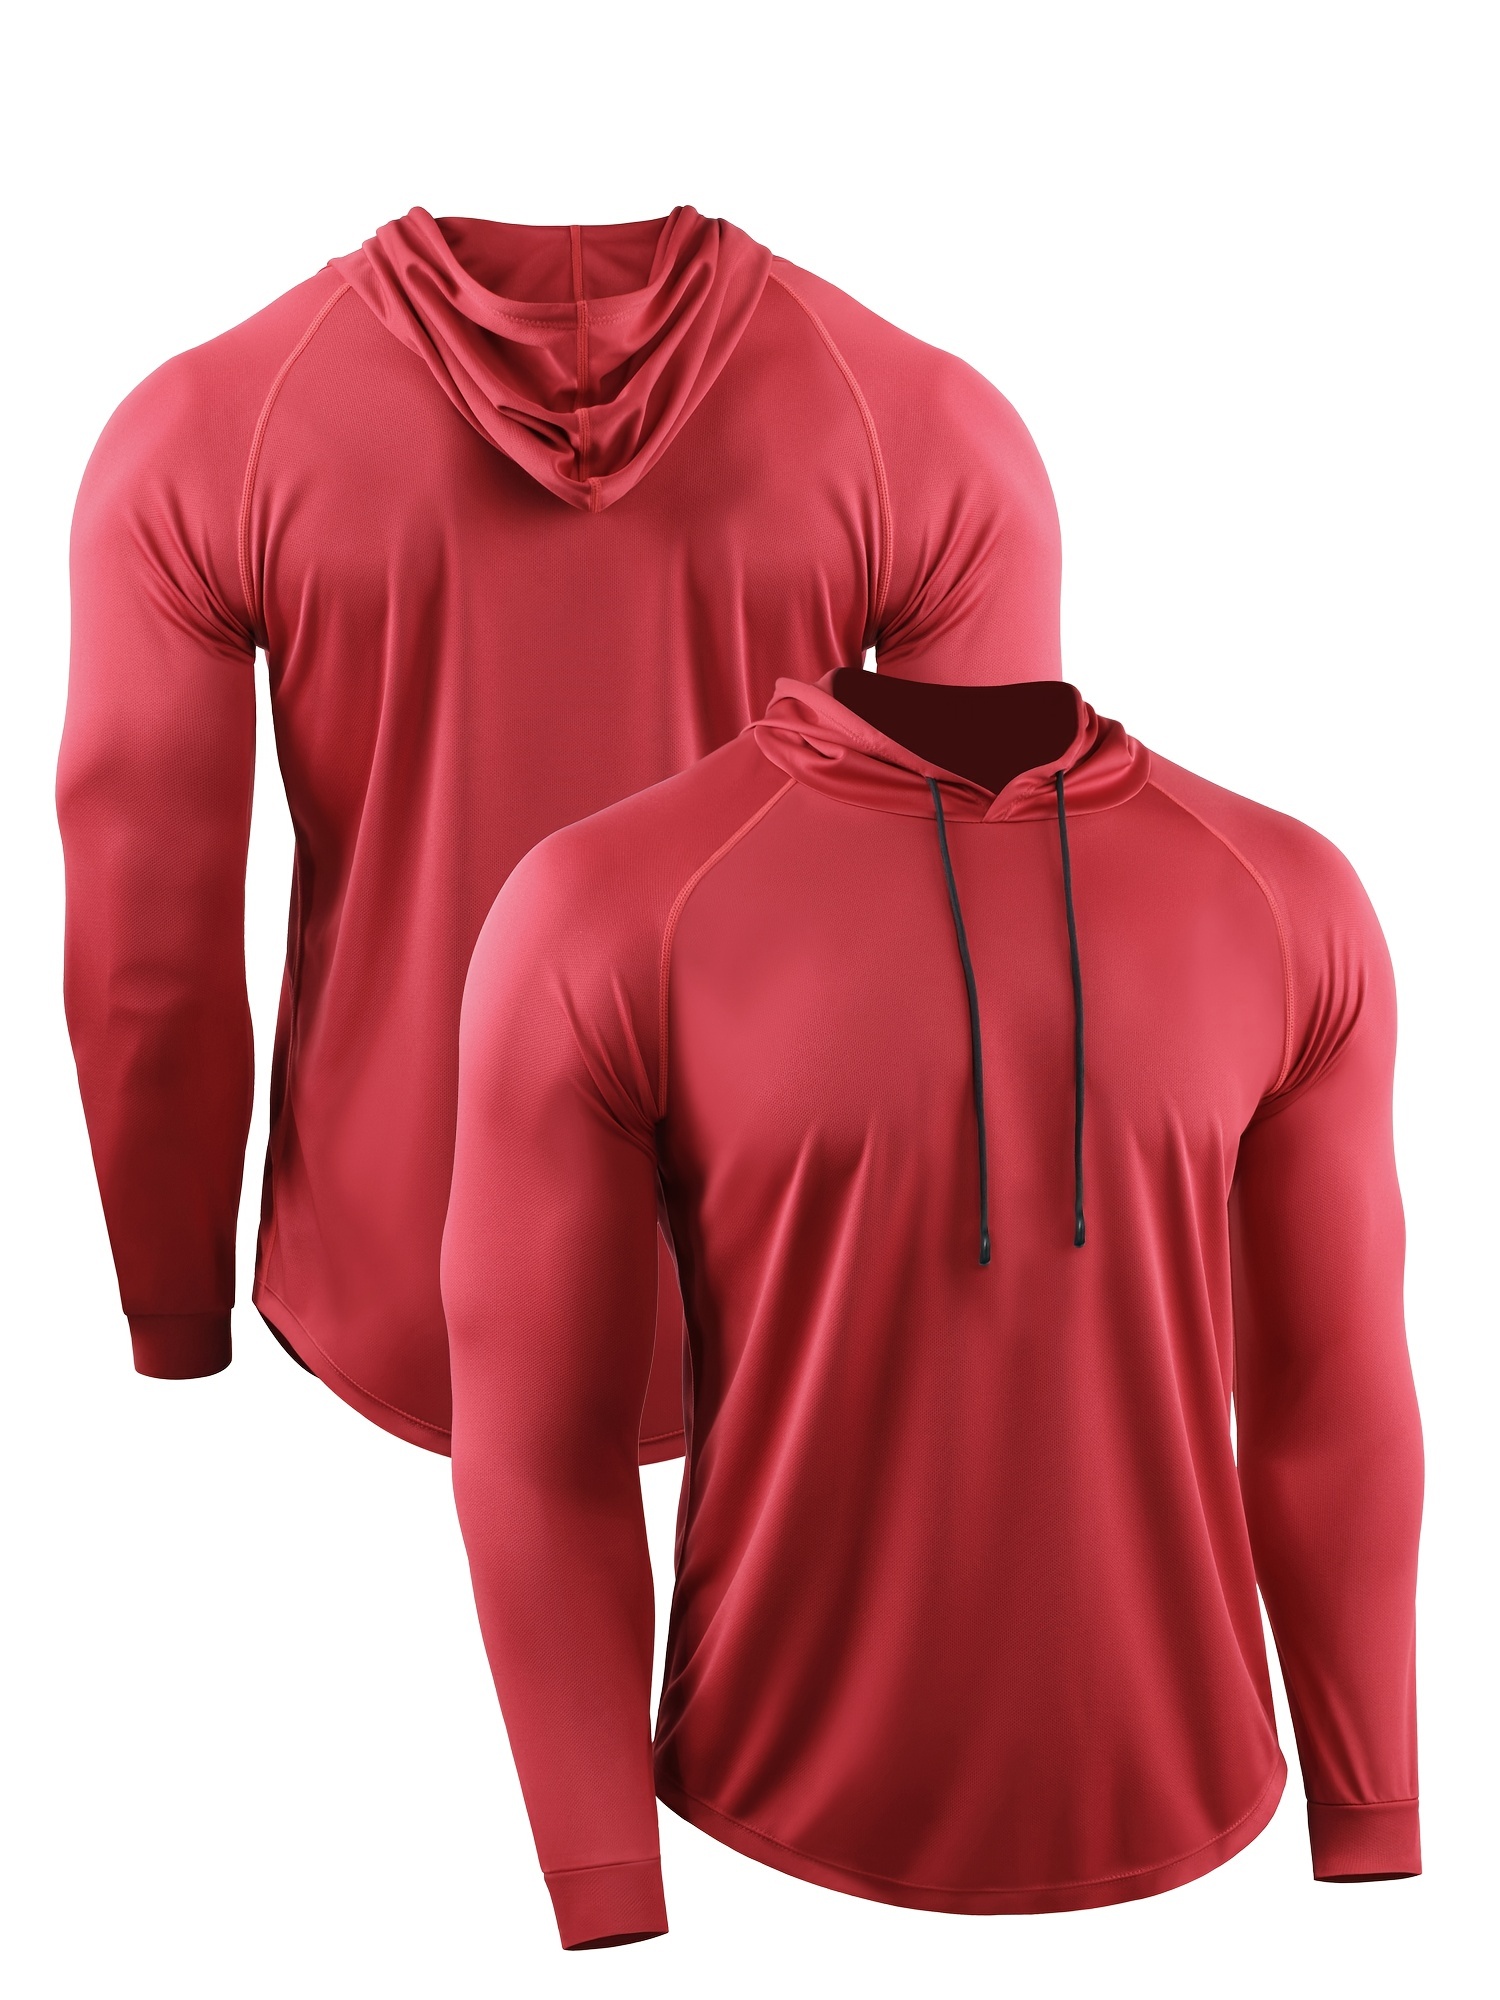 Red Muscle Training Fitness Hoodie Men's Loose Casual Sports